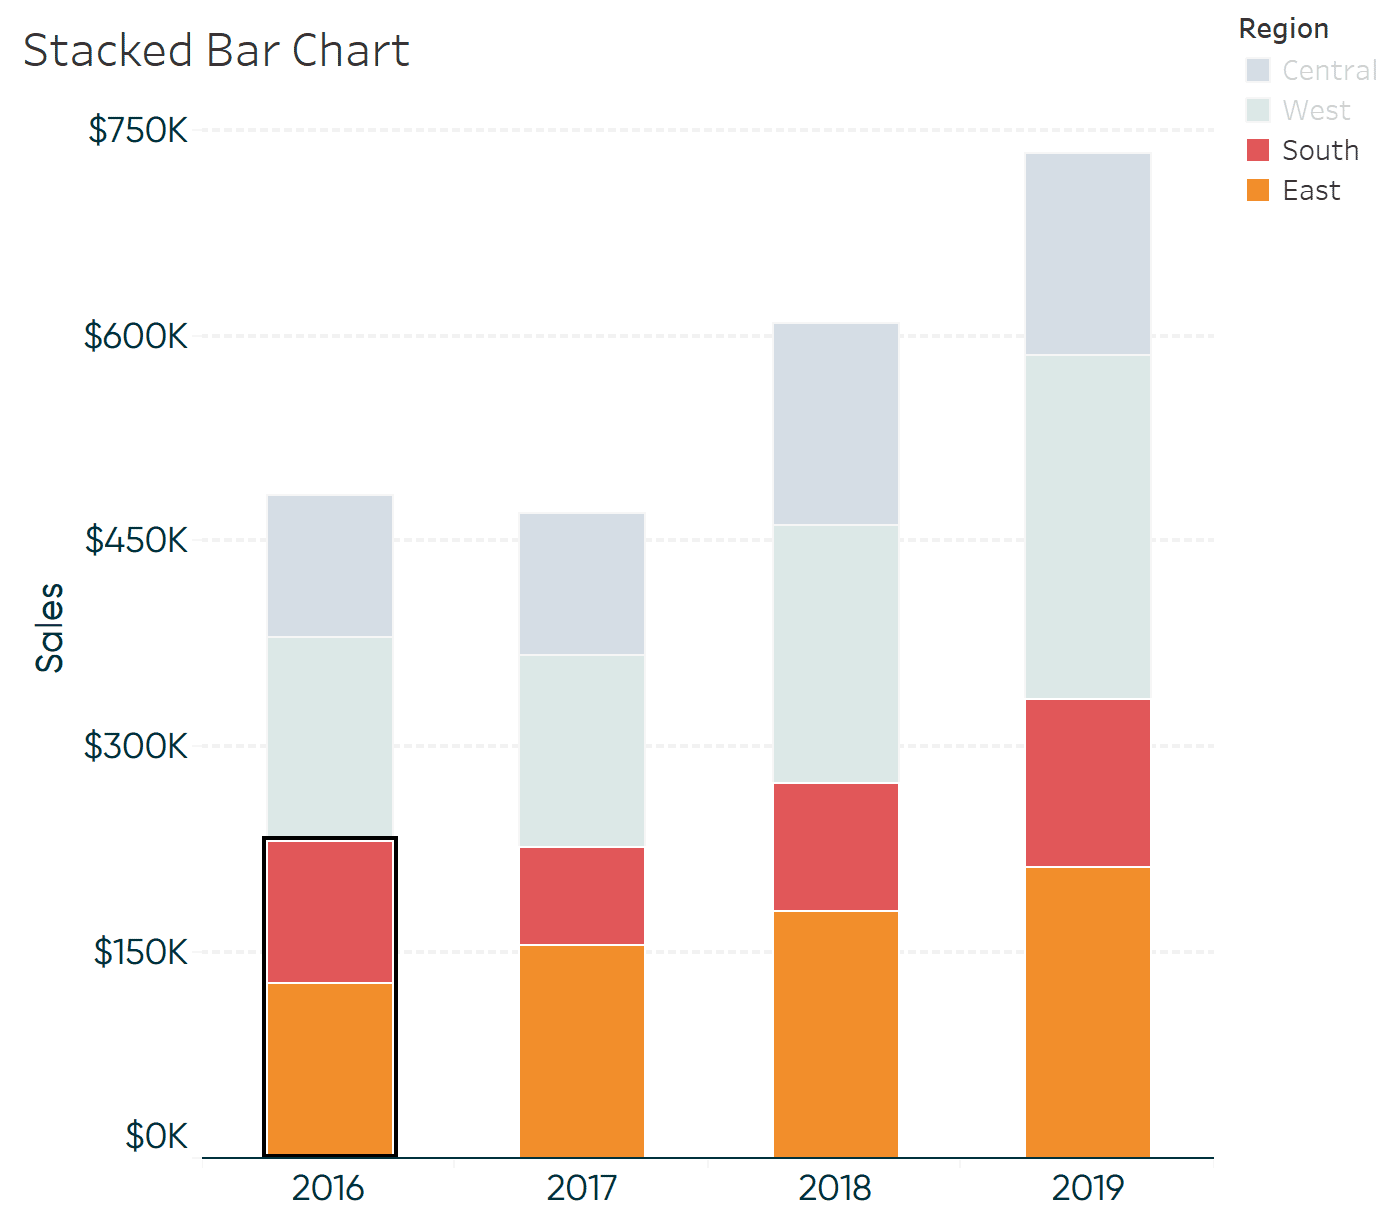 How to create a stacked bar chart in Tableau